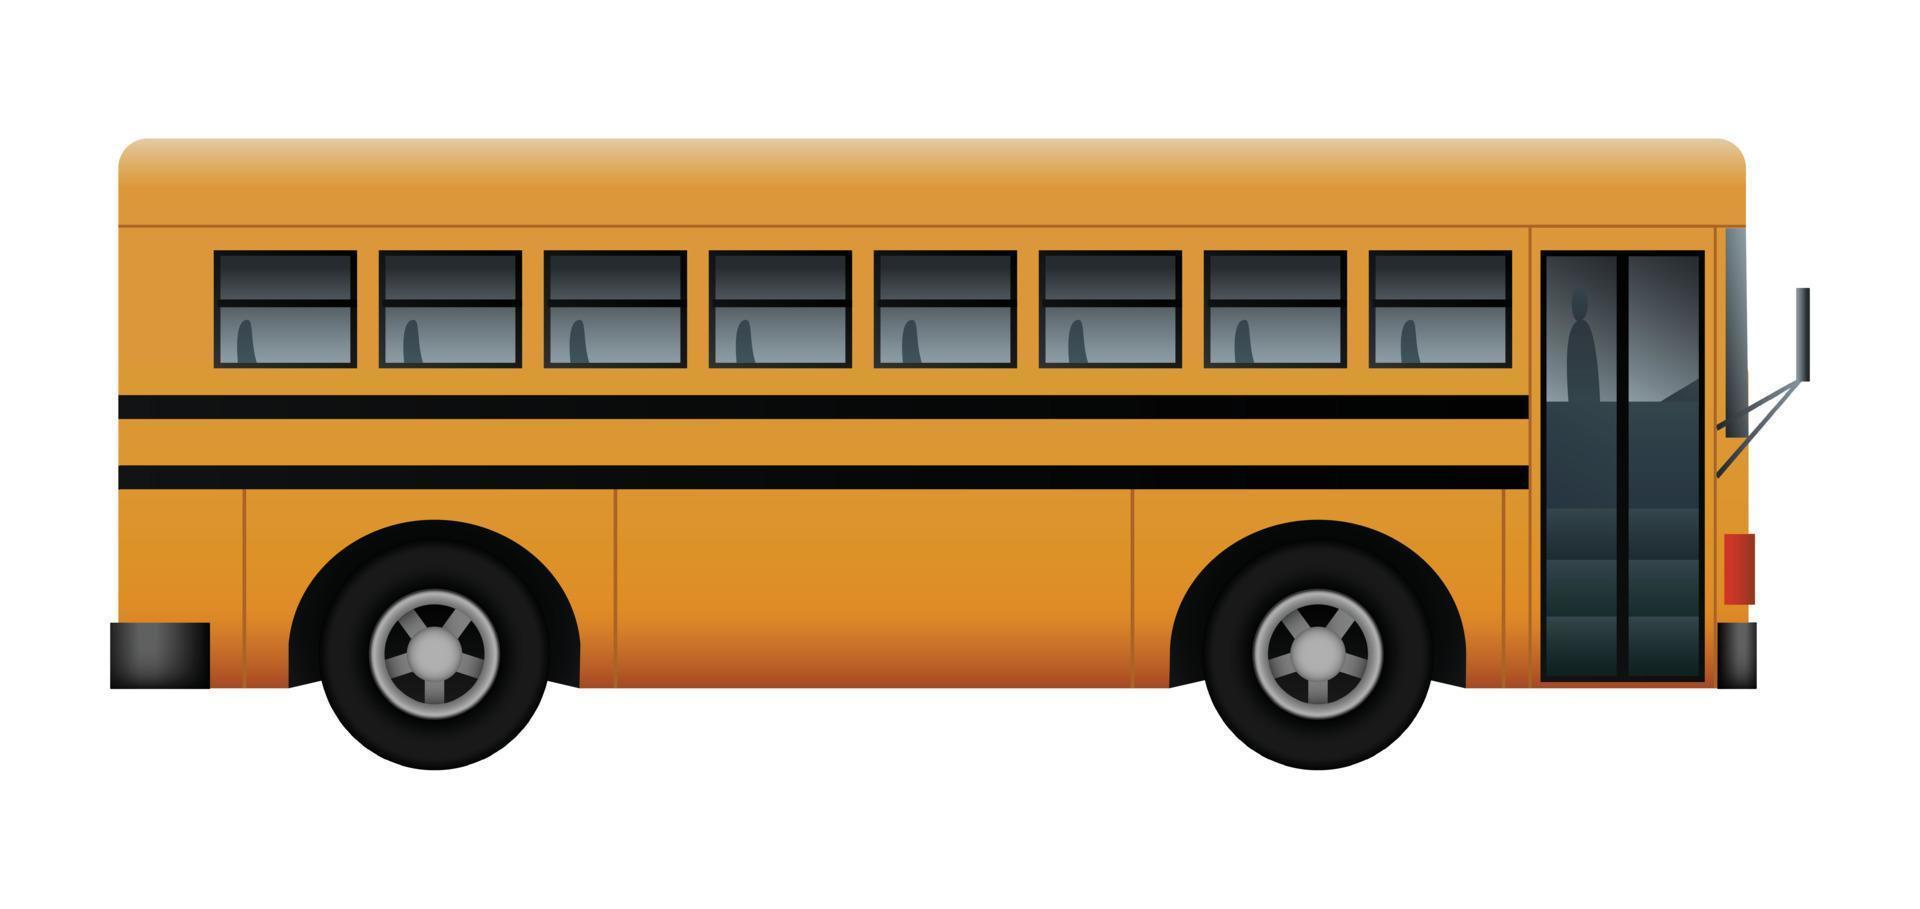 Side of school bus mockup, realistic style vector